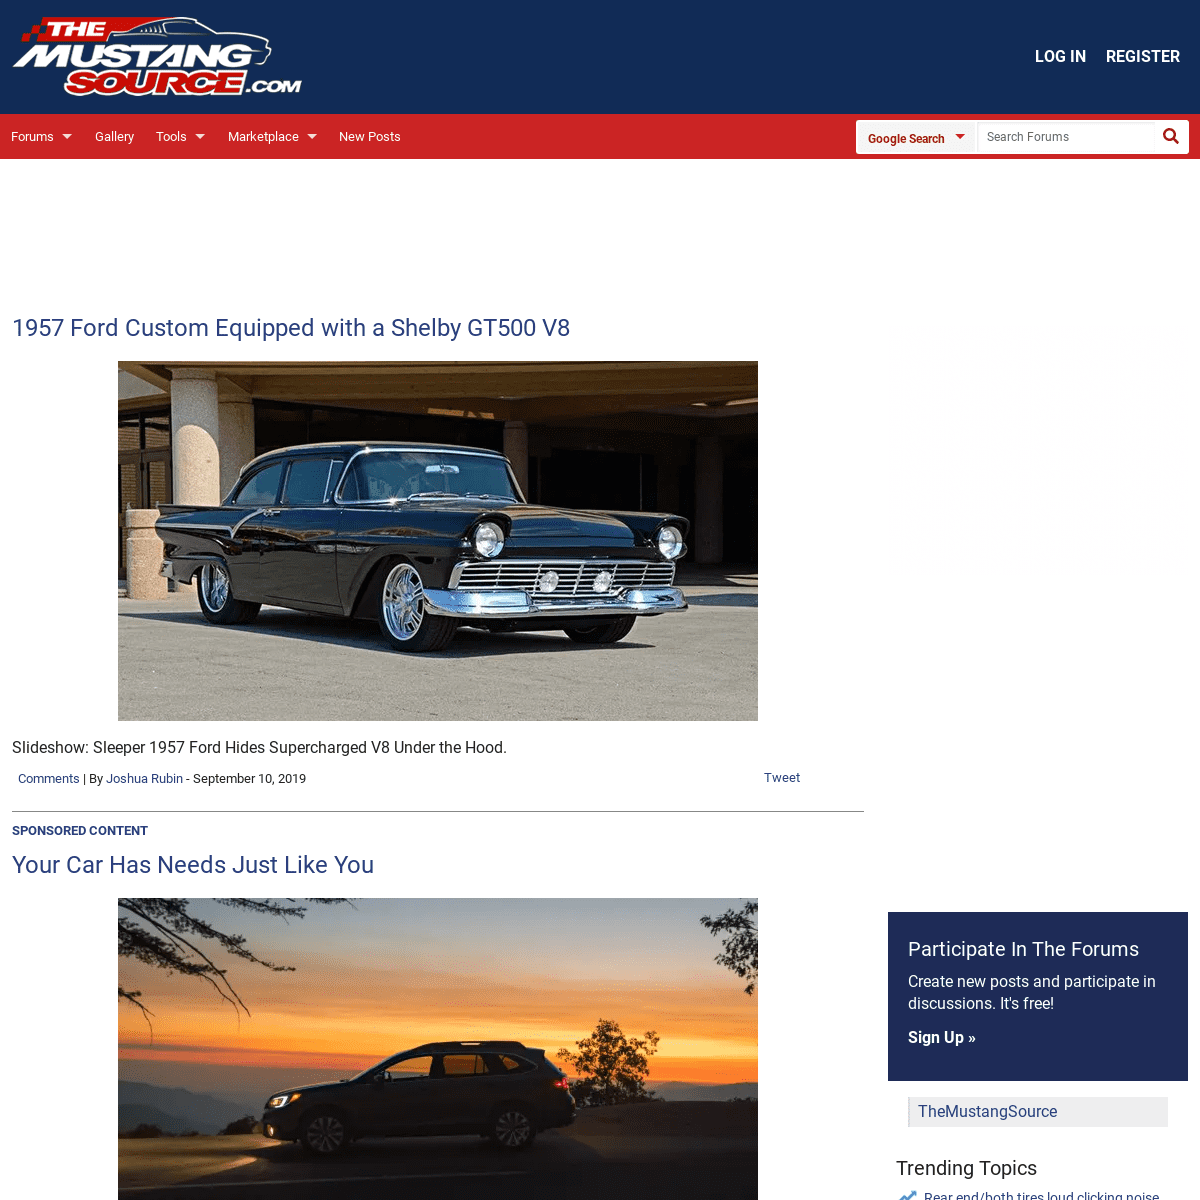 The Mustang Source - The Ford Mustang Fan Site